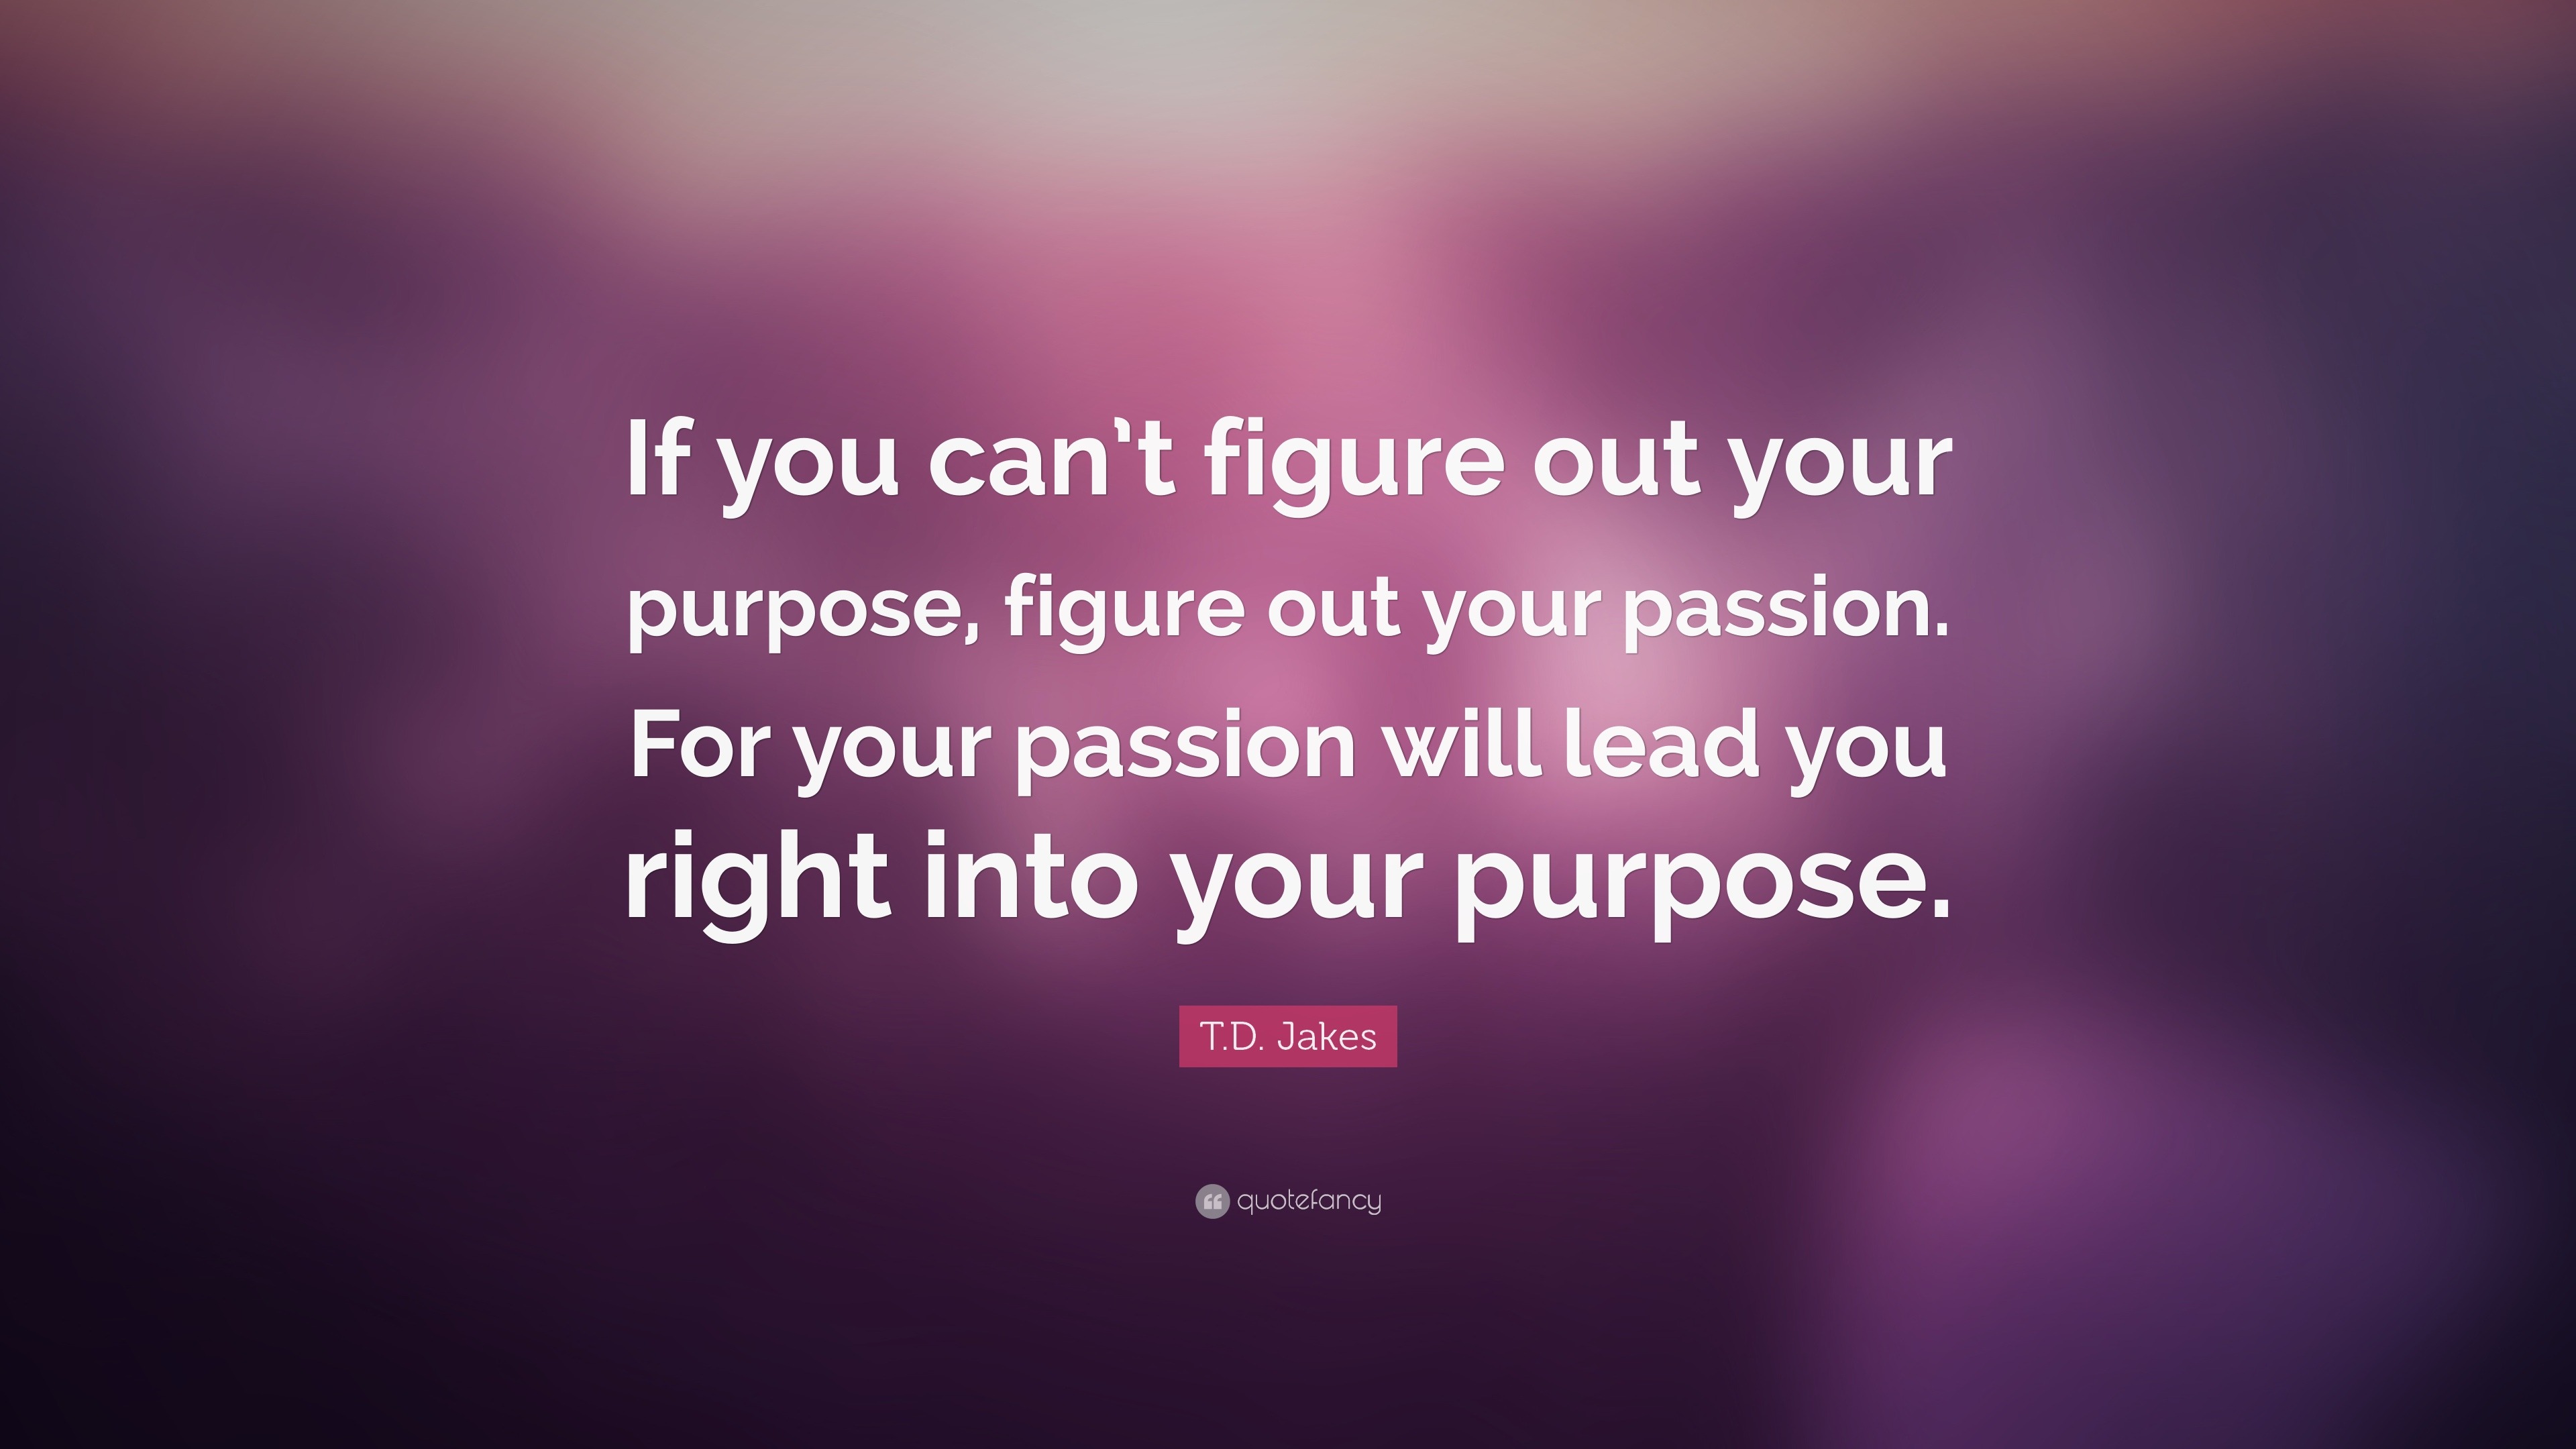 https://quotefancy.com/media/wallpaper/3840x2160/55593-T-D-Jakes-Quote-If-you-can-t-figure-out-your-purpose-figure-out.jpg